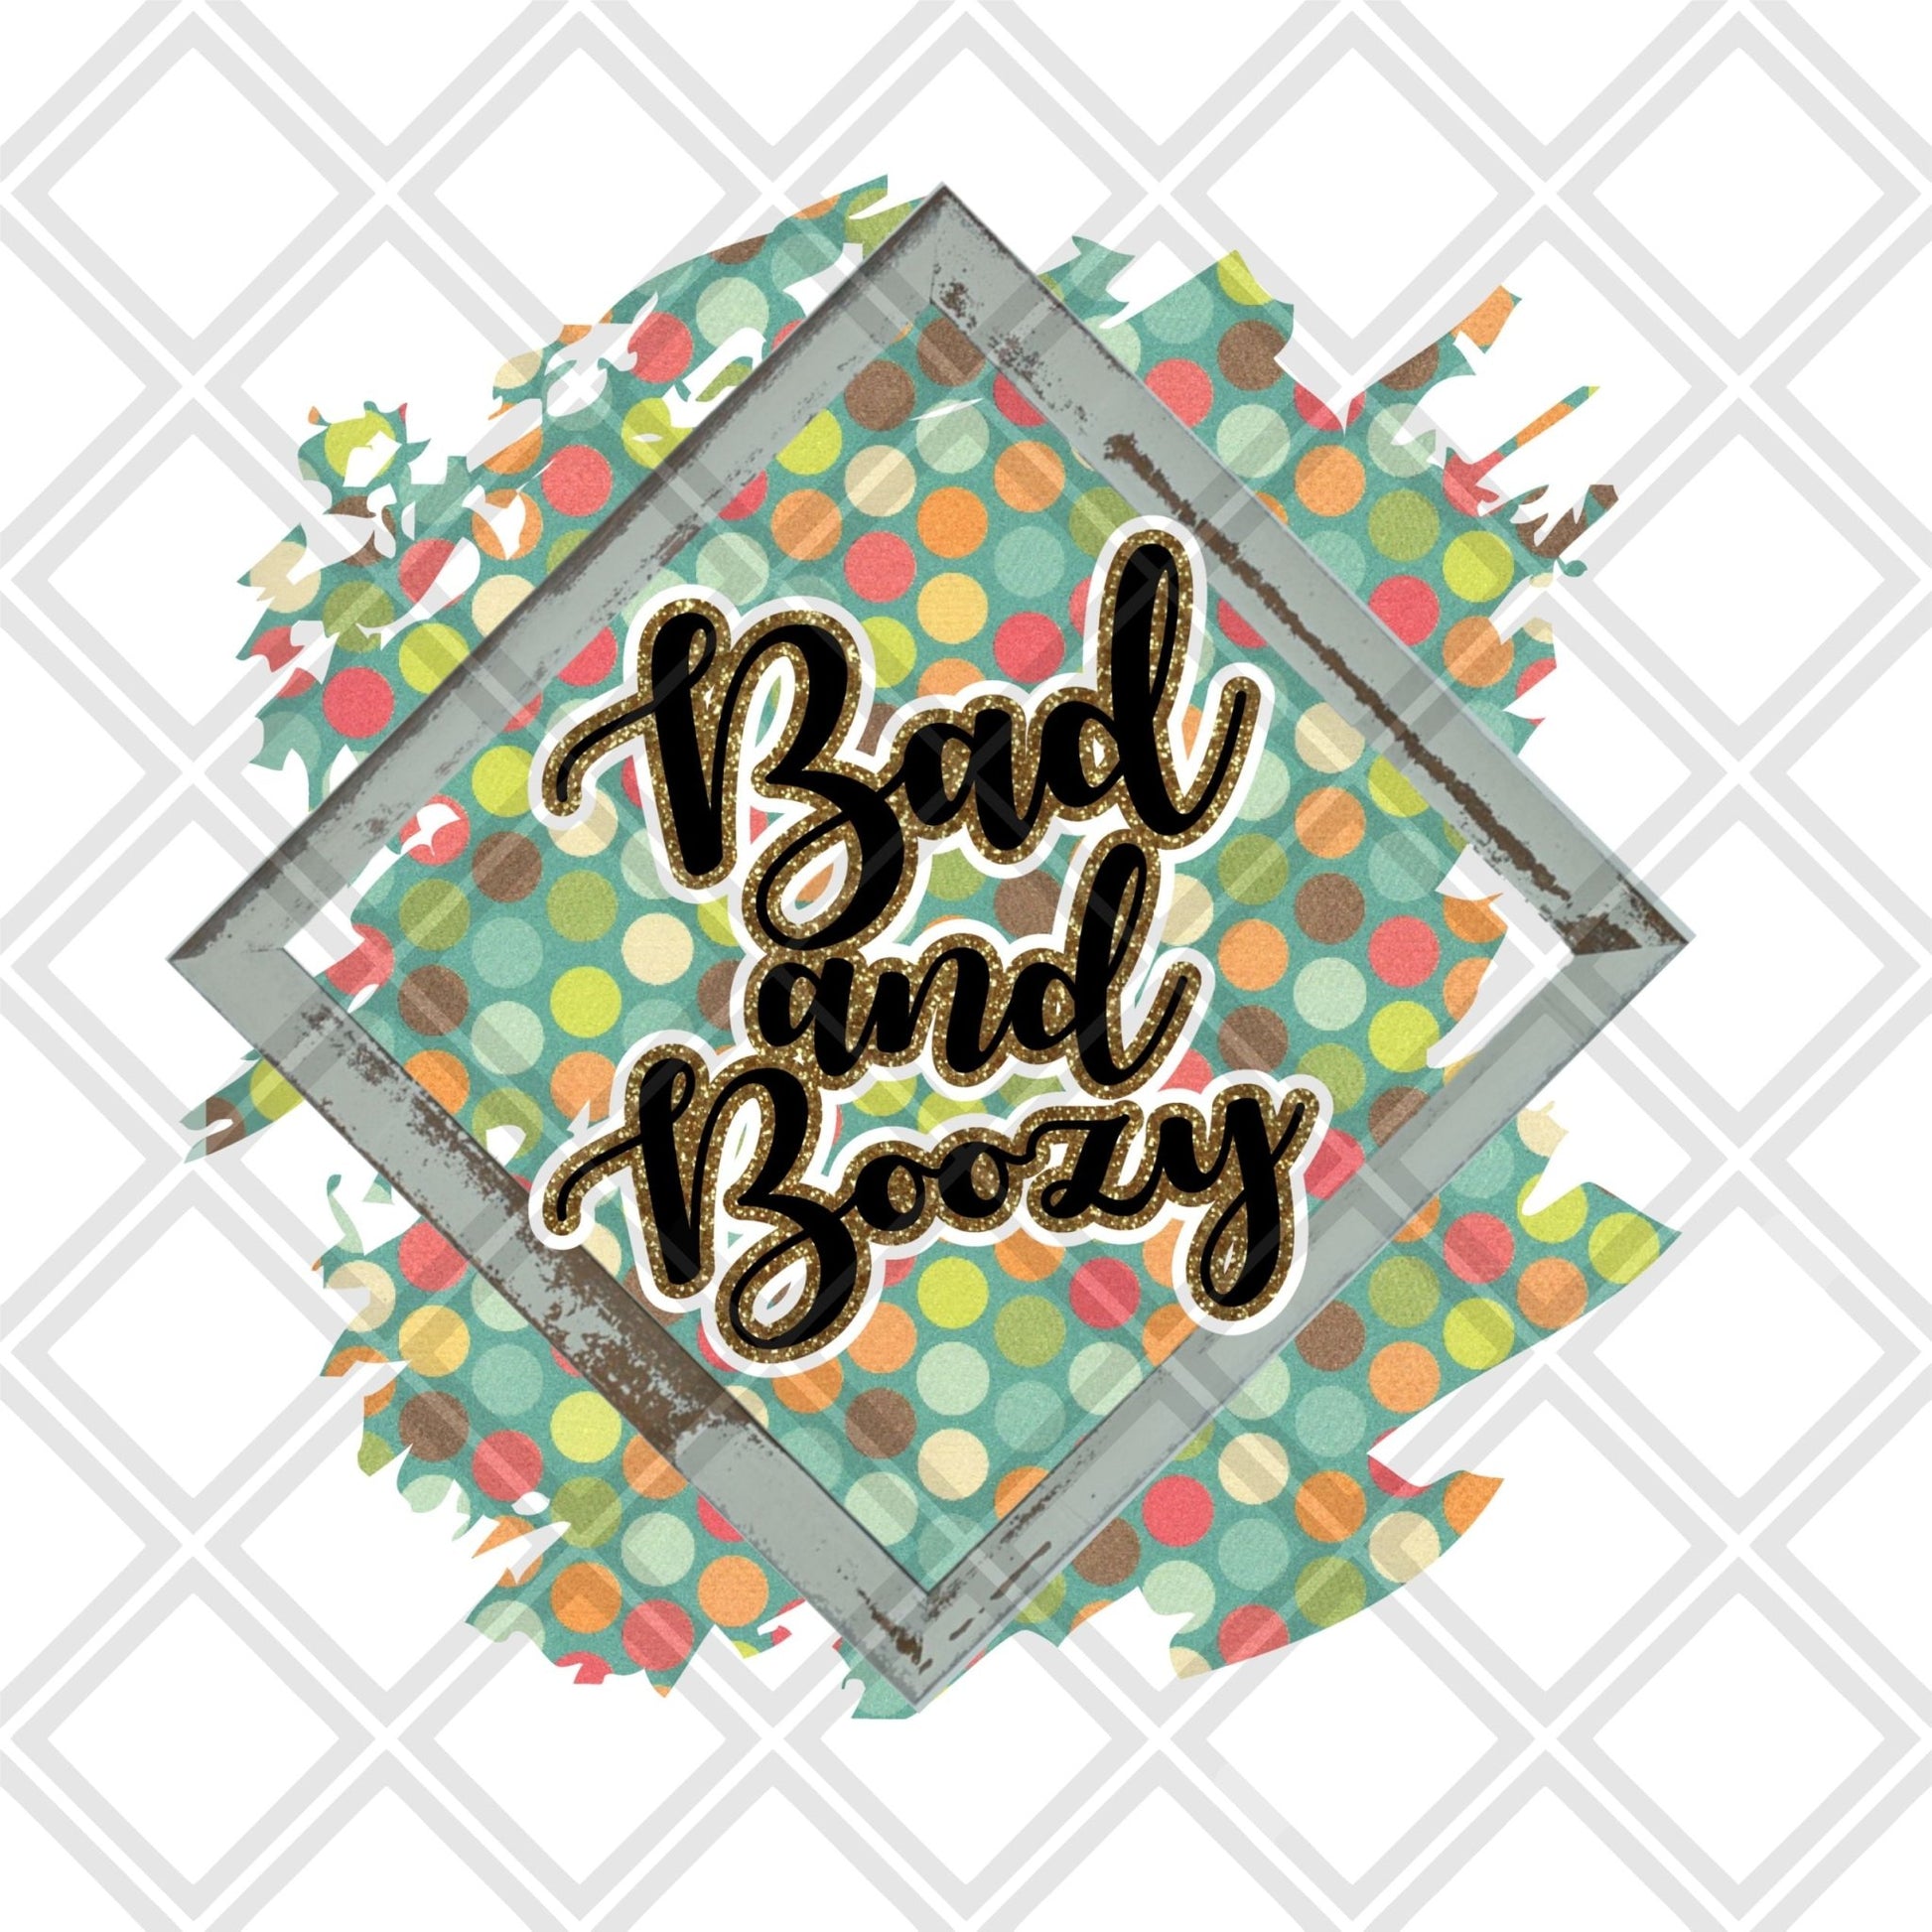 Bad and Boozy Digital Download Instand Download - Do it yourself Transfers